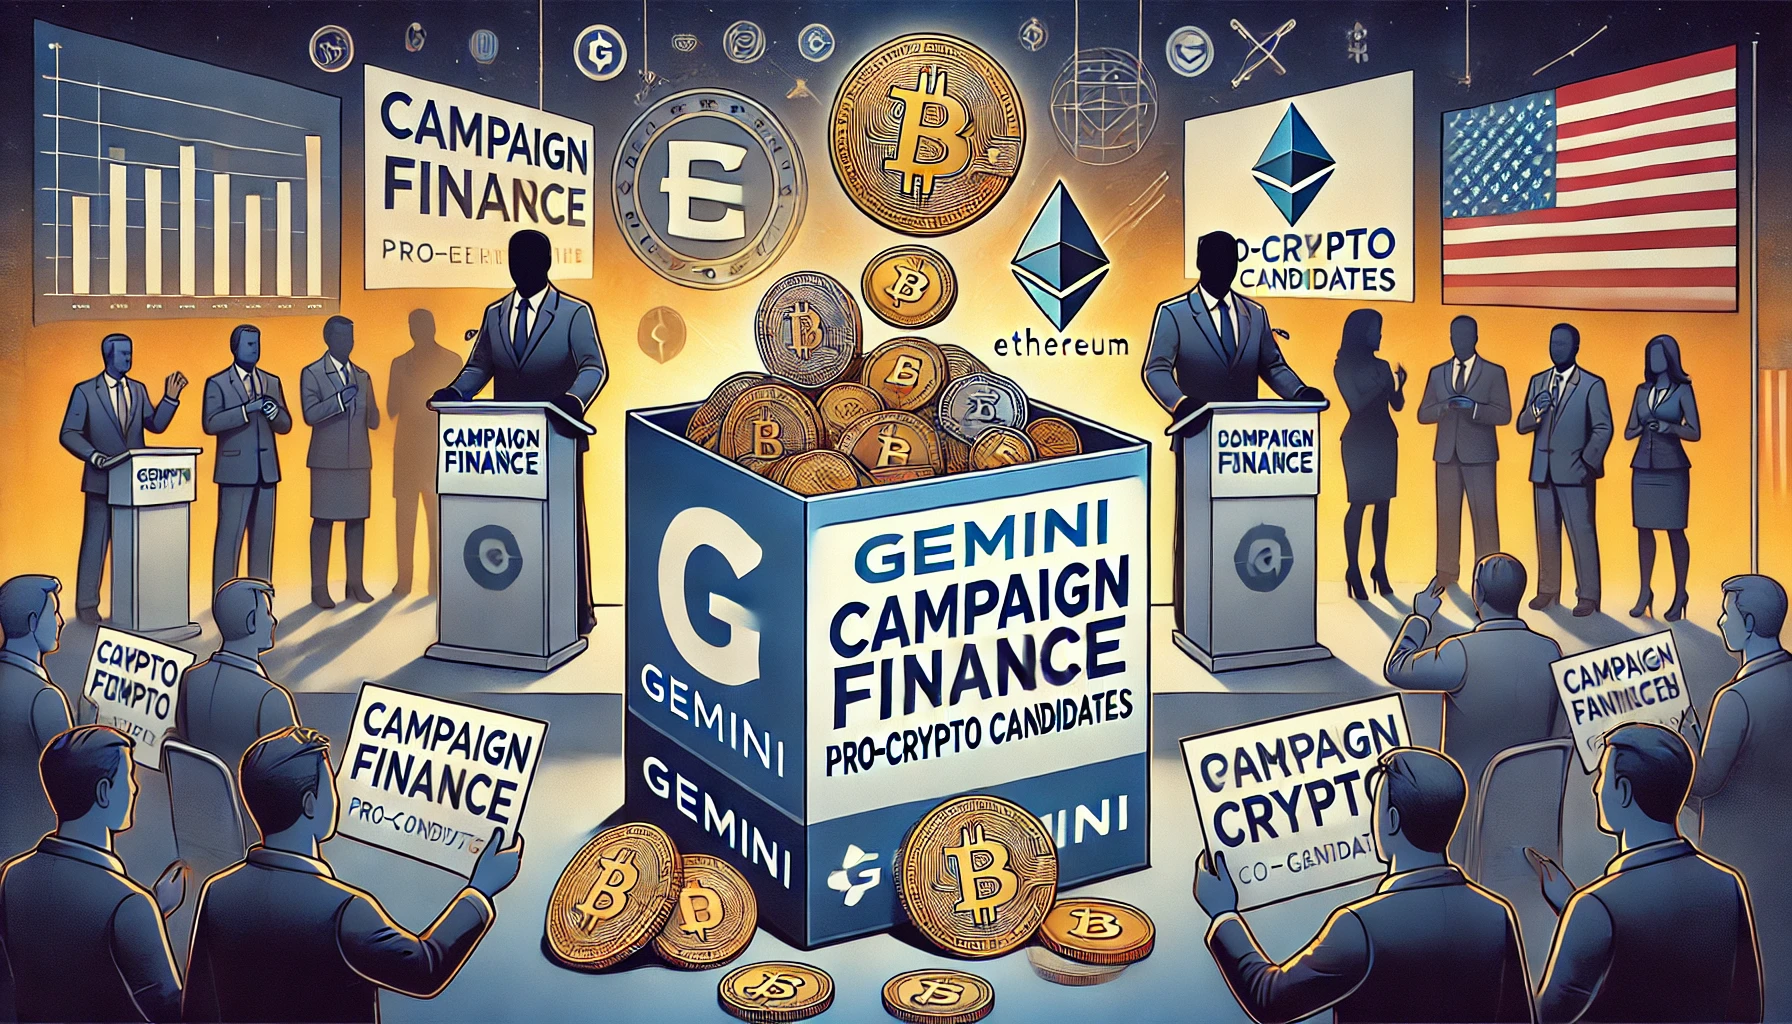 Gemini’s Initiative: Supporting Pro-Crypto Candidates Ahead of the Presidential Election